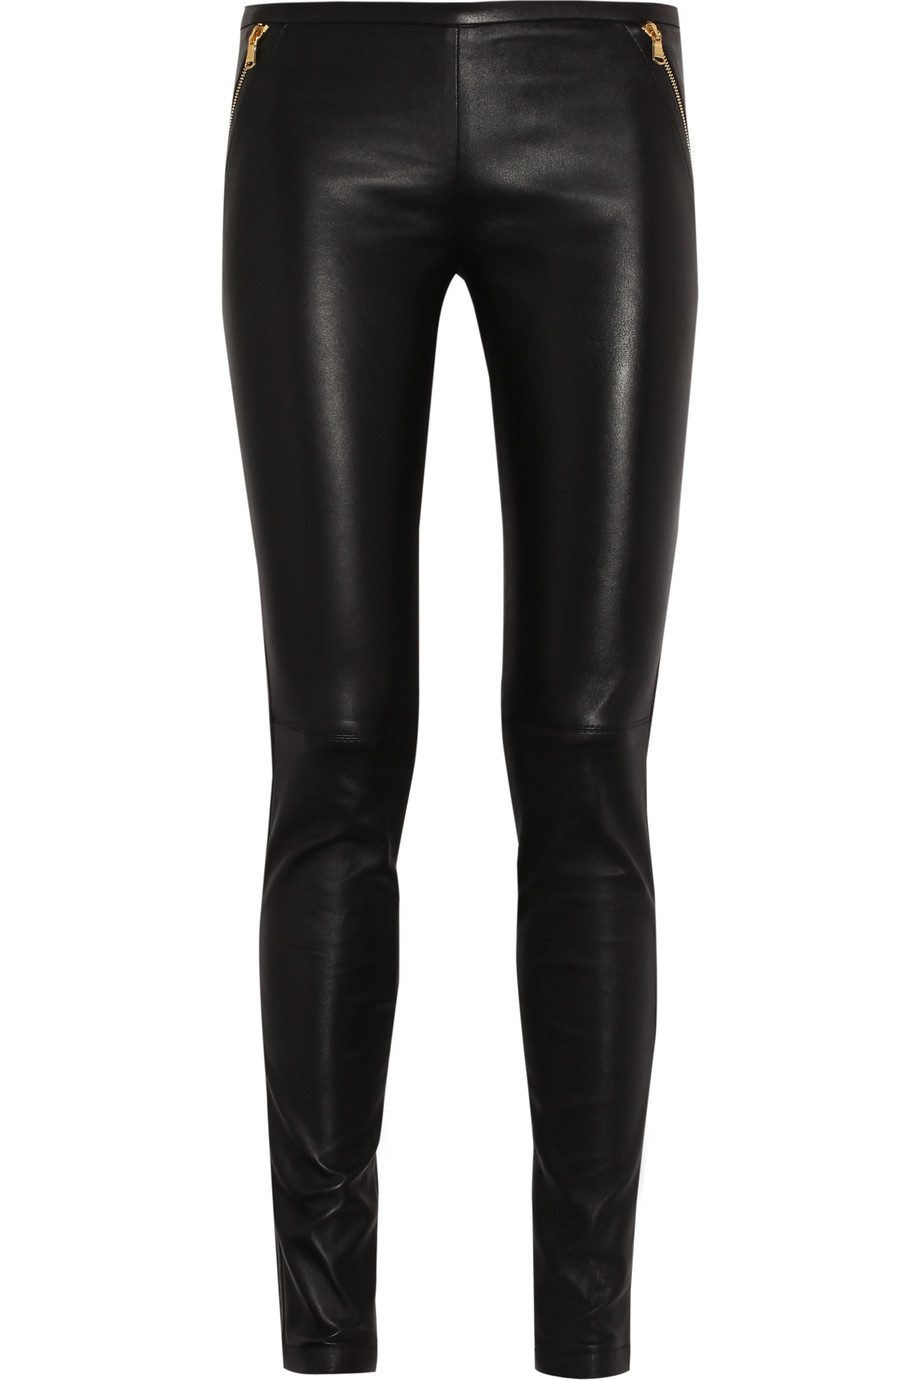 Emilio Pucci Stretch Leather Skinny Pants in Black | Lyst